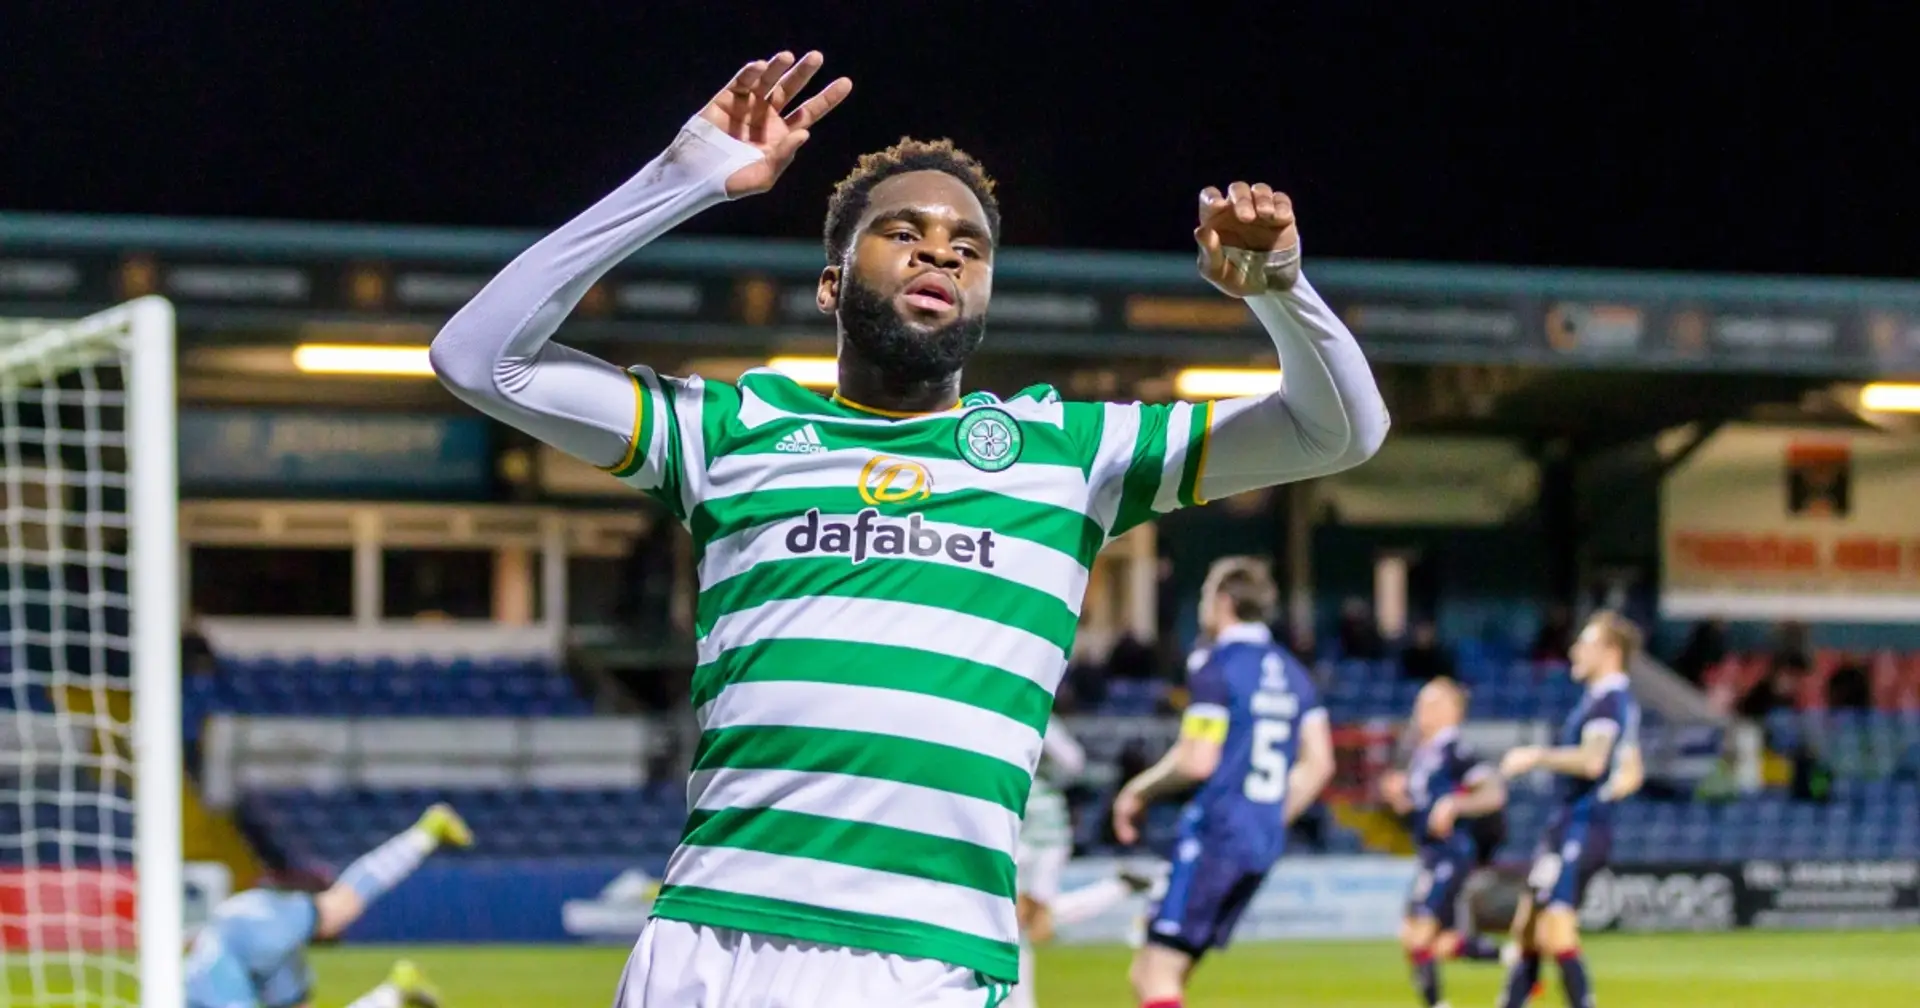 'Kind of business we should be doing', 'he'd struggle in England': Global Arsenal community react to Edouard links